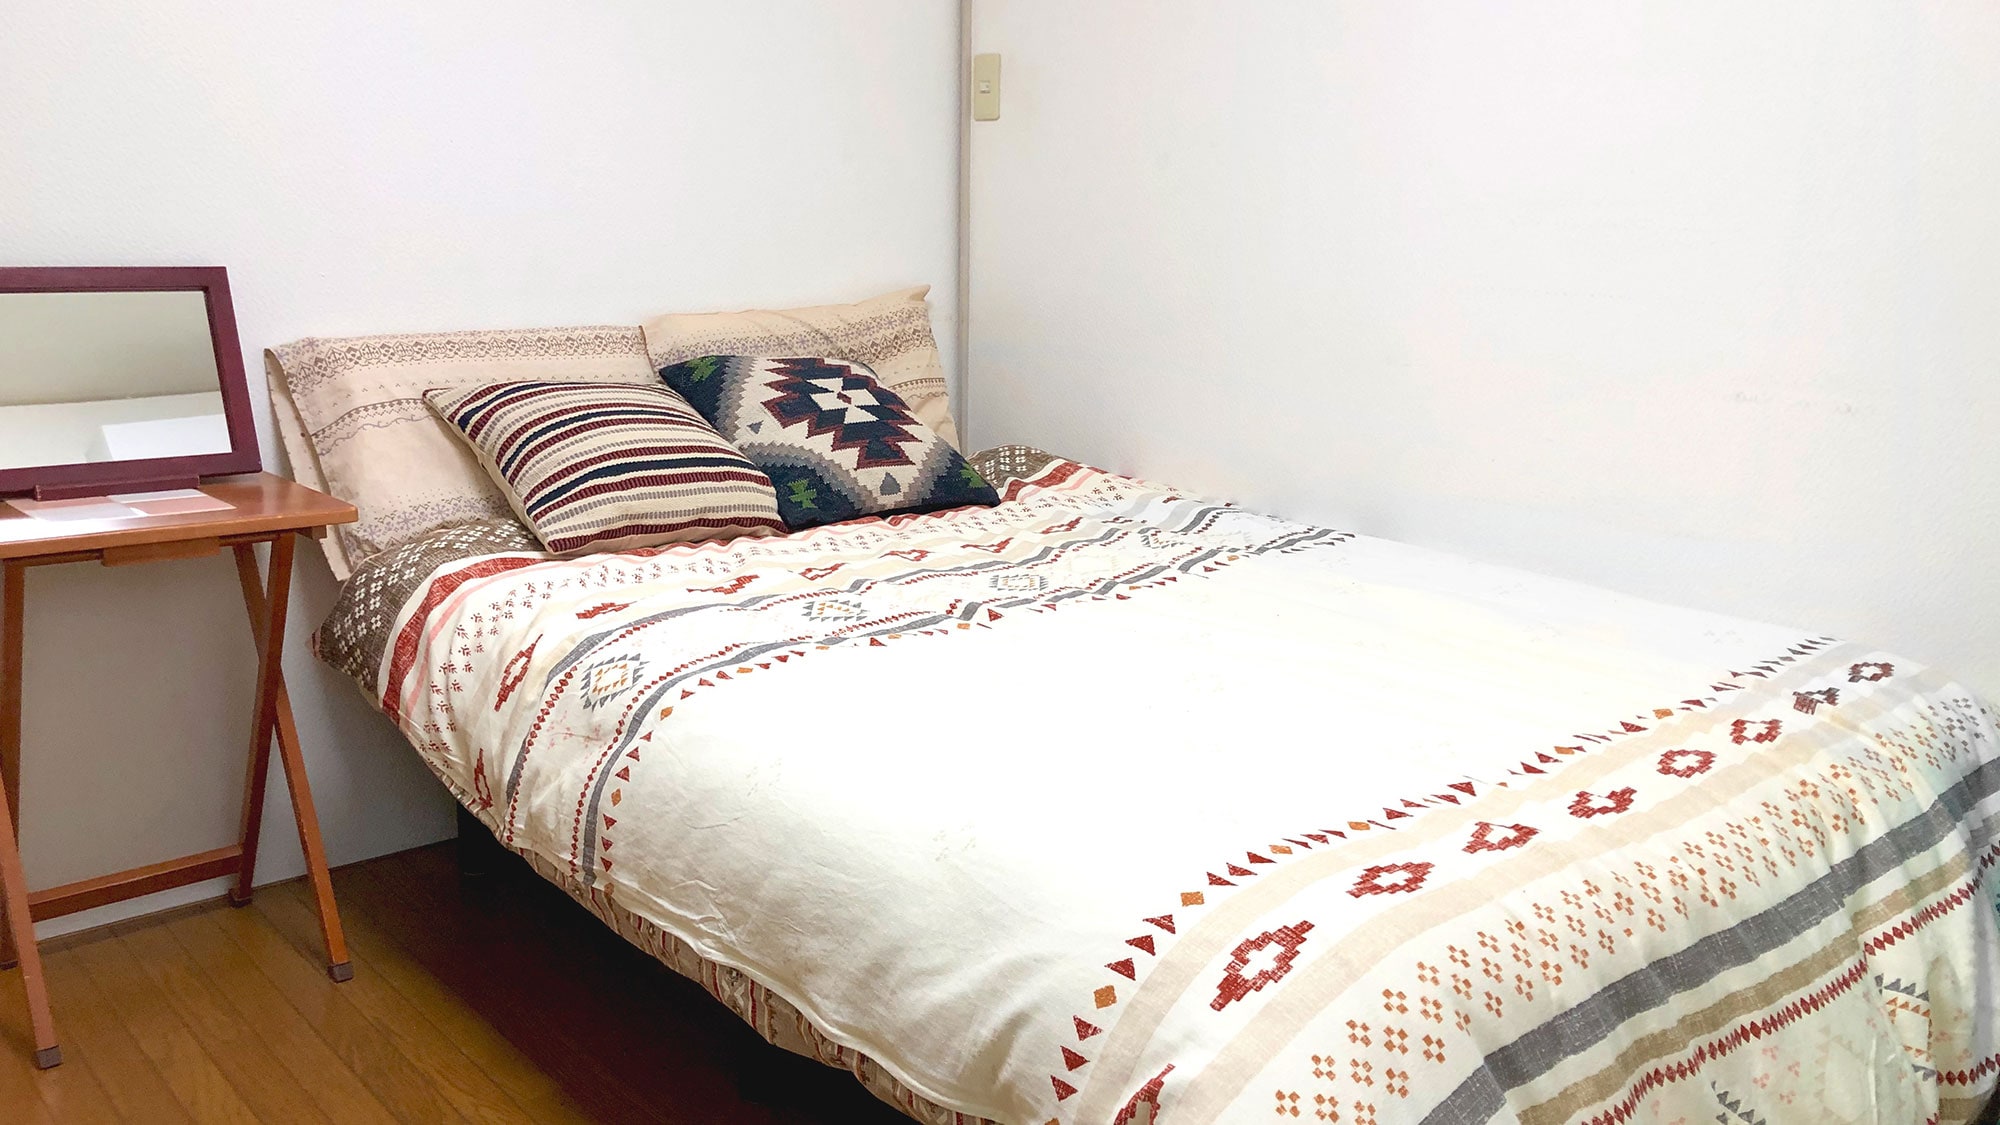 ・ One semi-double bed is installed in the bedroom of the Western-style room.